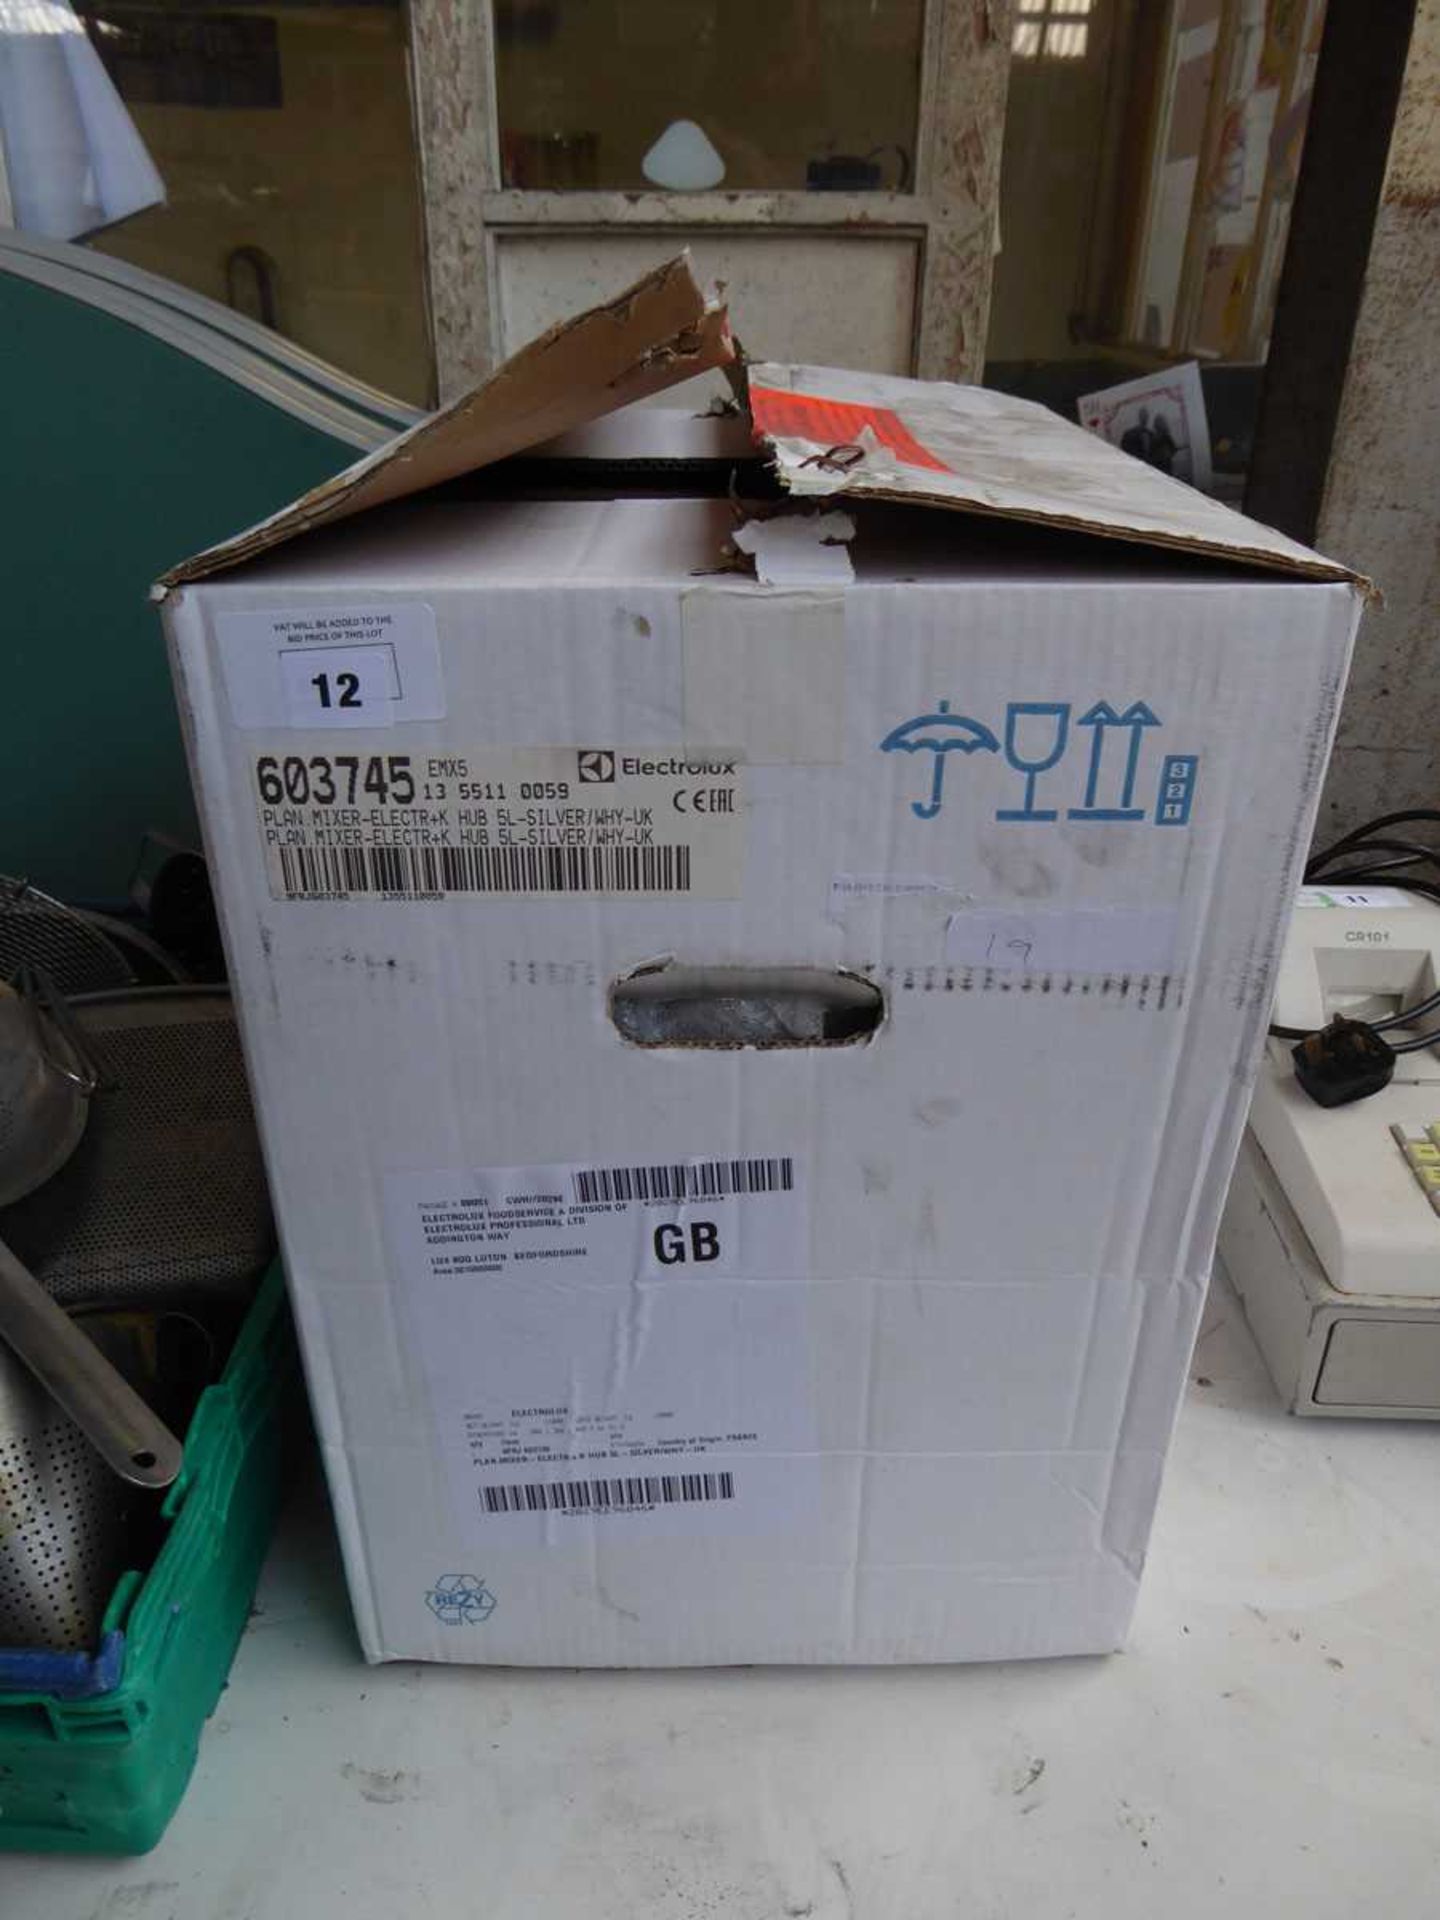 +VAT Electrolux planetary mixer 5L - Image 3 of 3